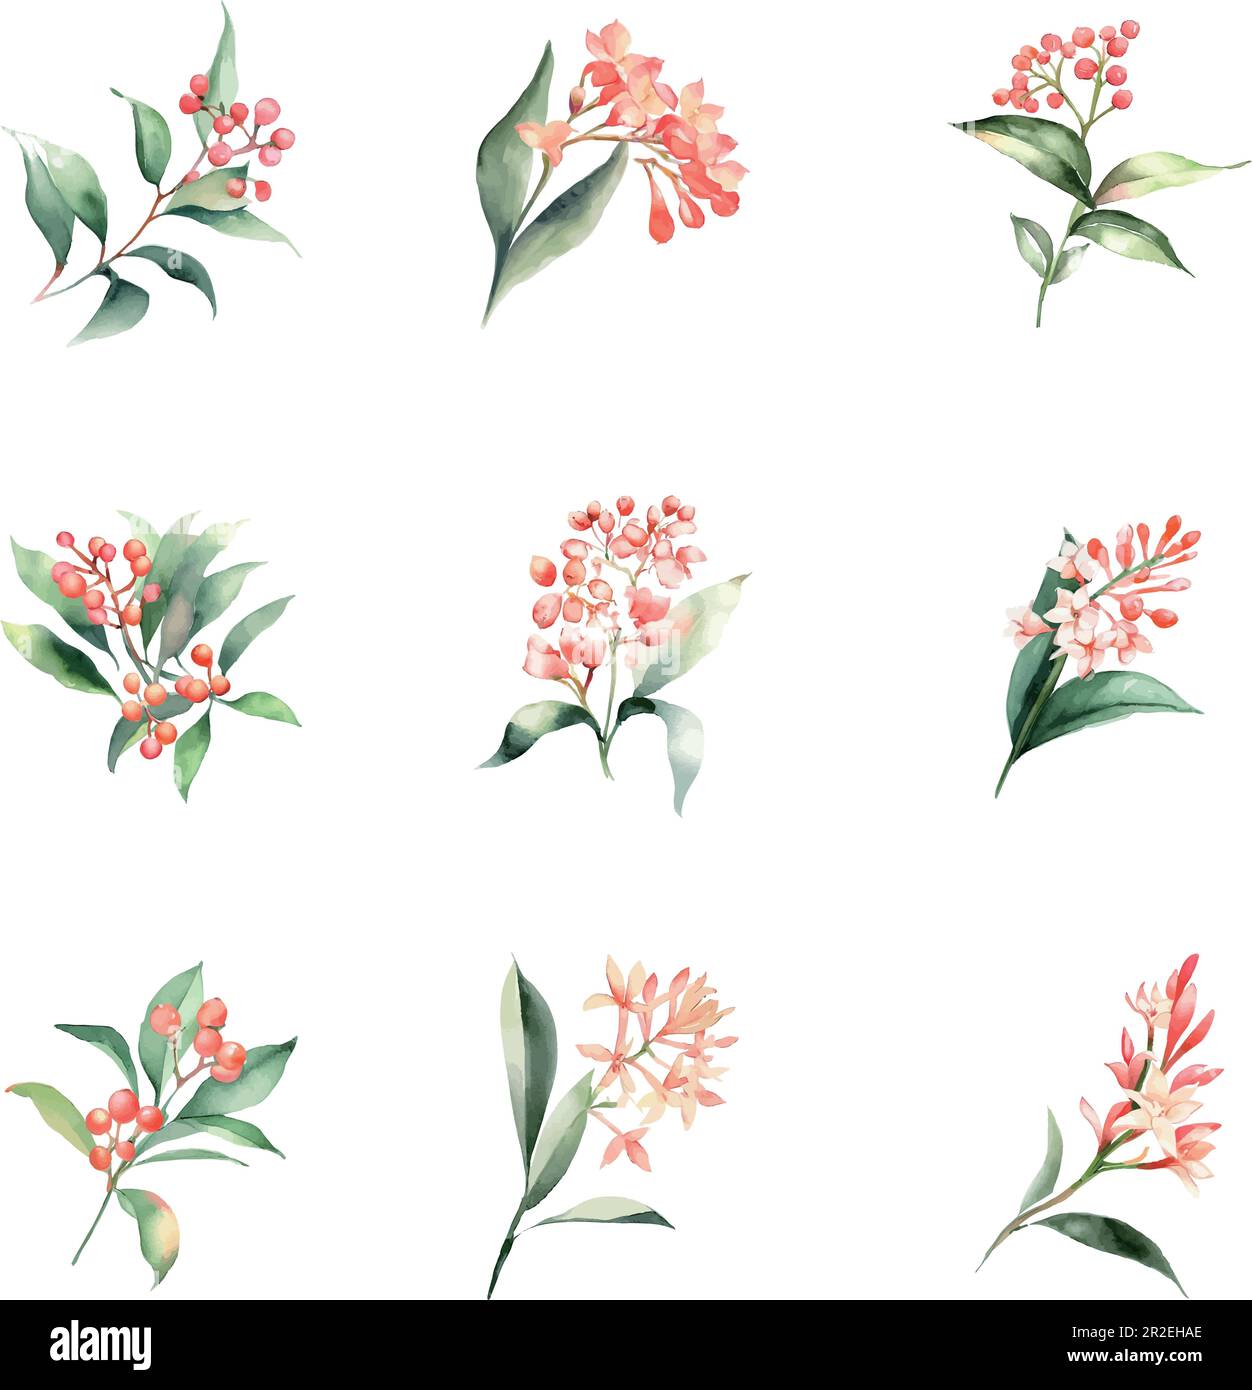 Ardisia crenata.Watercolor flowers set. Hand painted vector illustration. Isolated on white background. Stock Vector